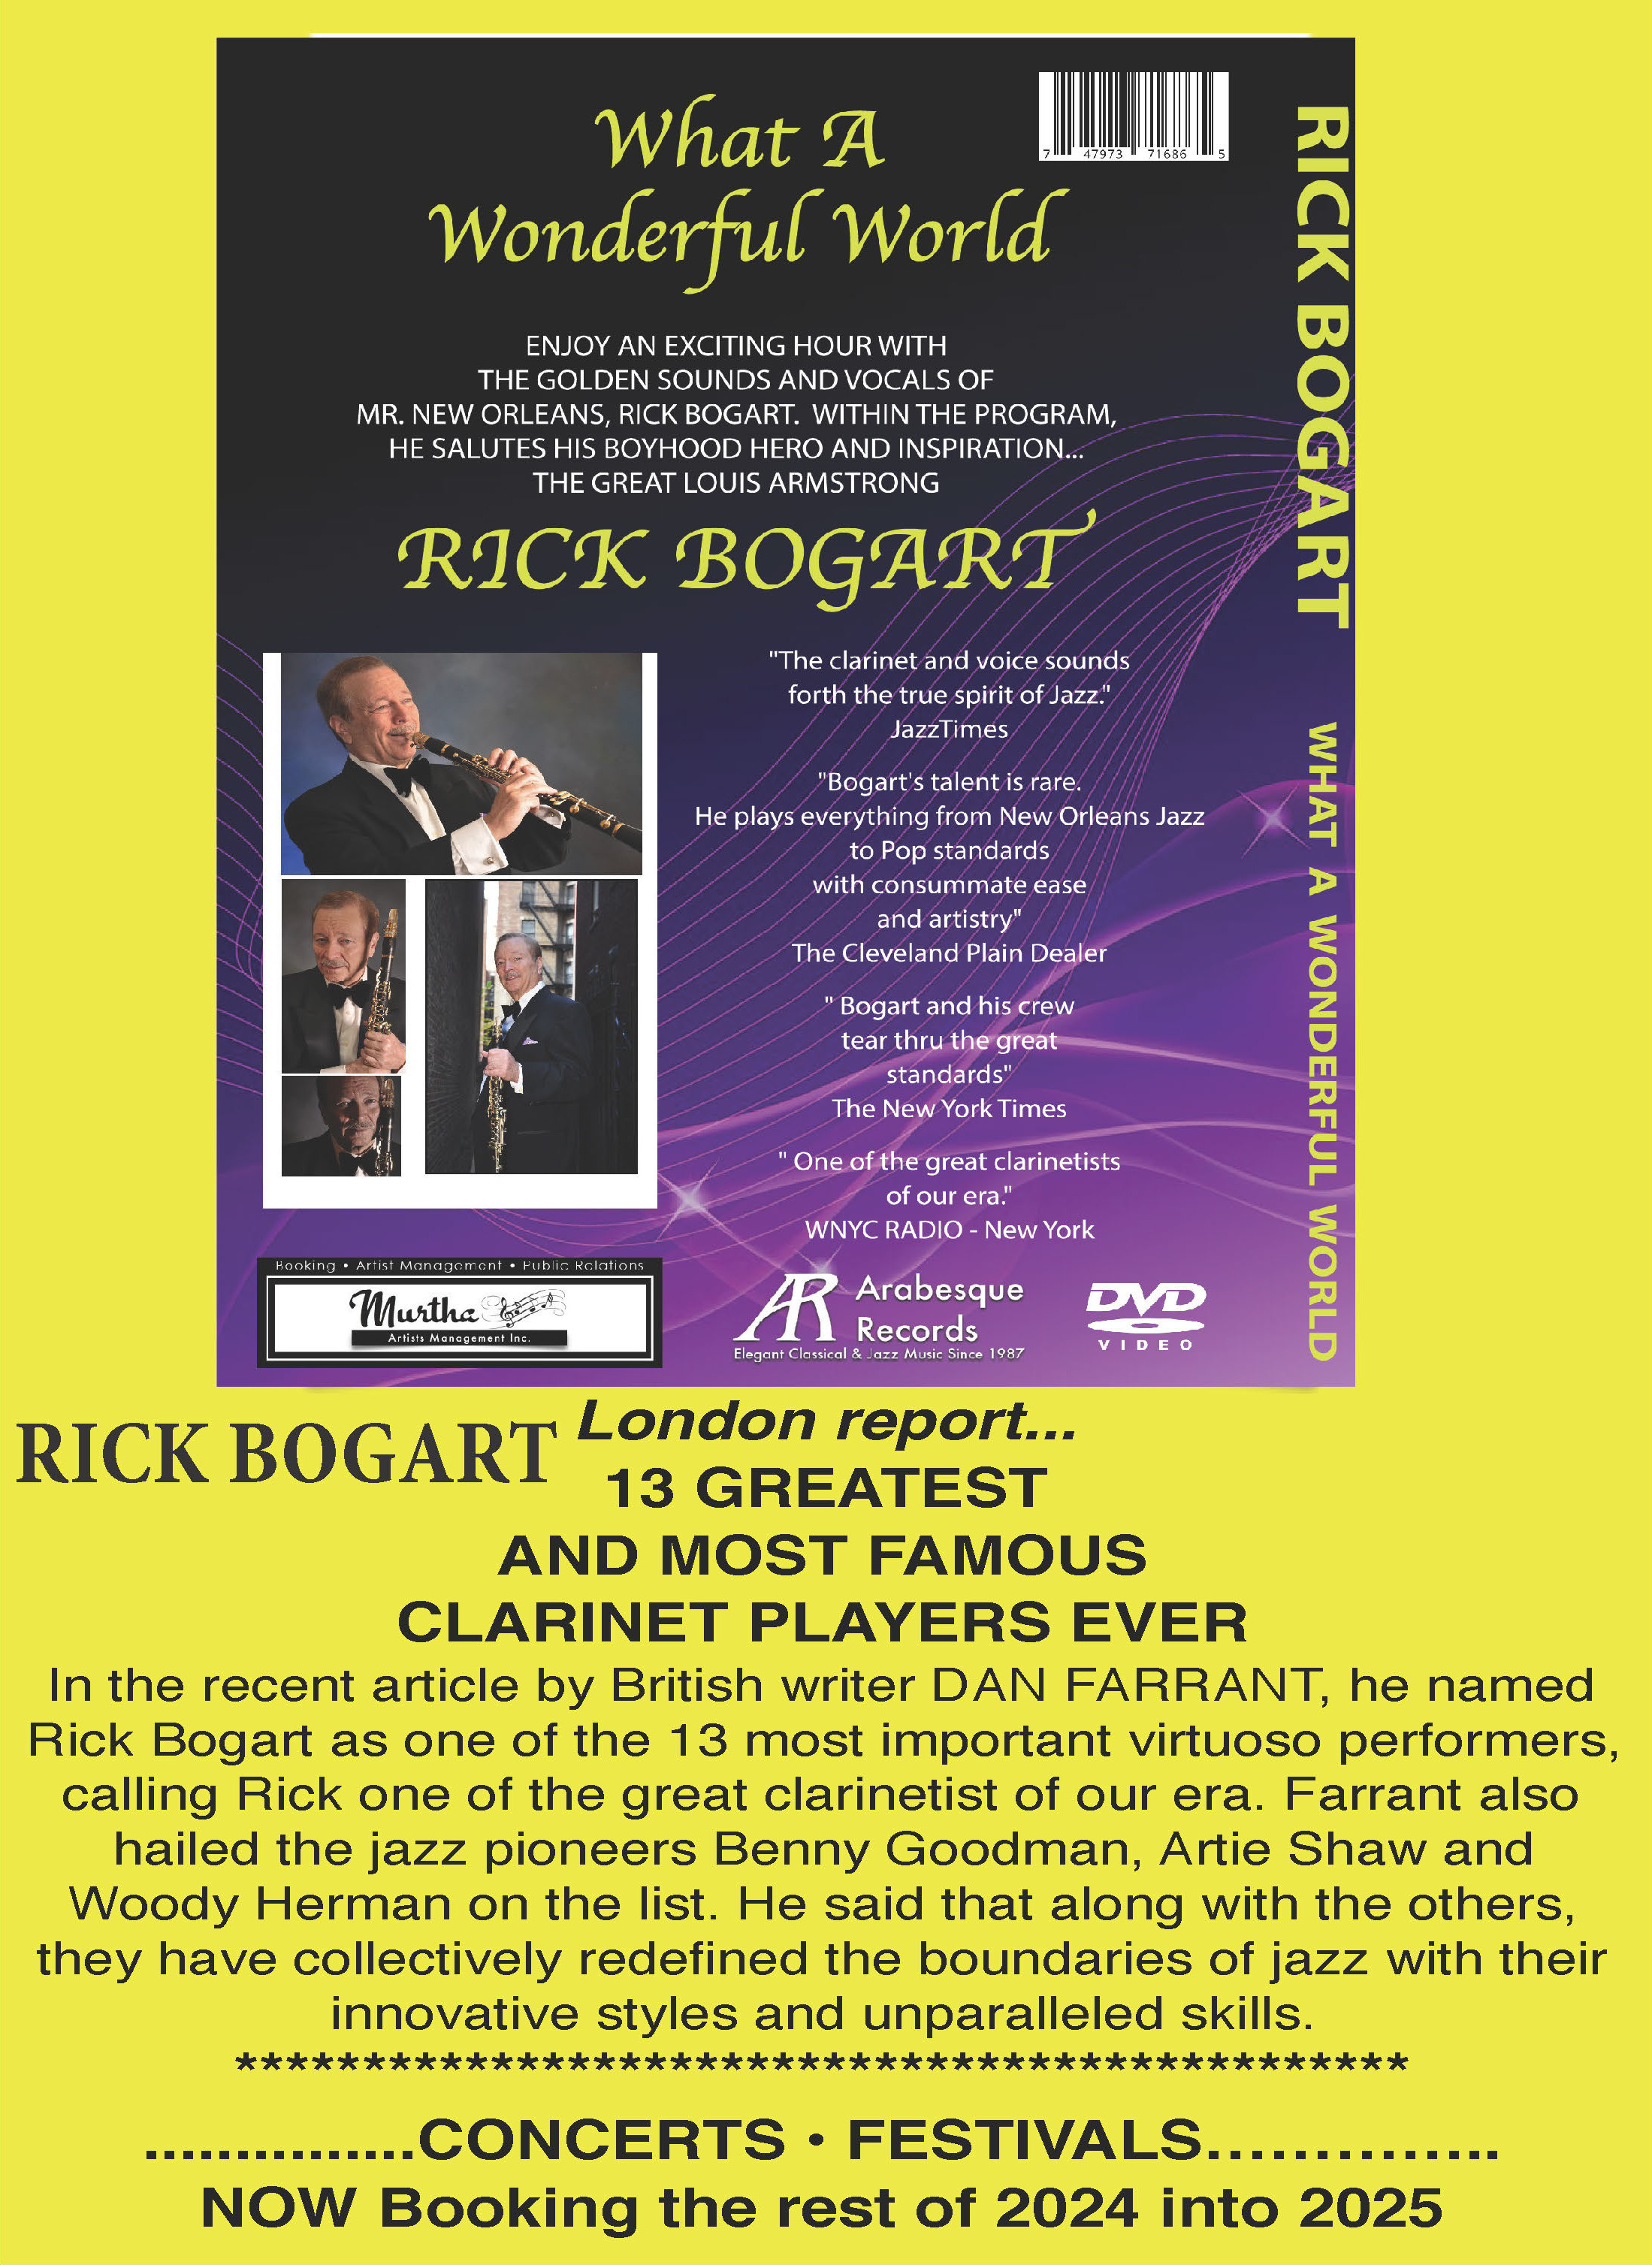 What a Wonderful World; Enjoy an exciting hour with the golden sounds and vocals of Mr. New Orleans, Rick Bogart. Within the program, he salutes his boyhood hero and inspiration; The great Louis Armstrong